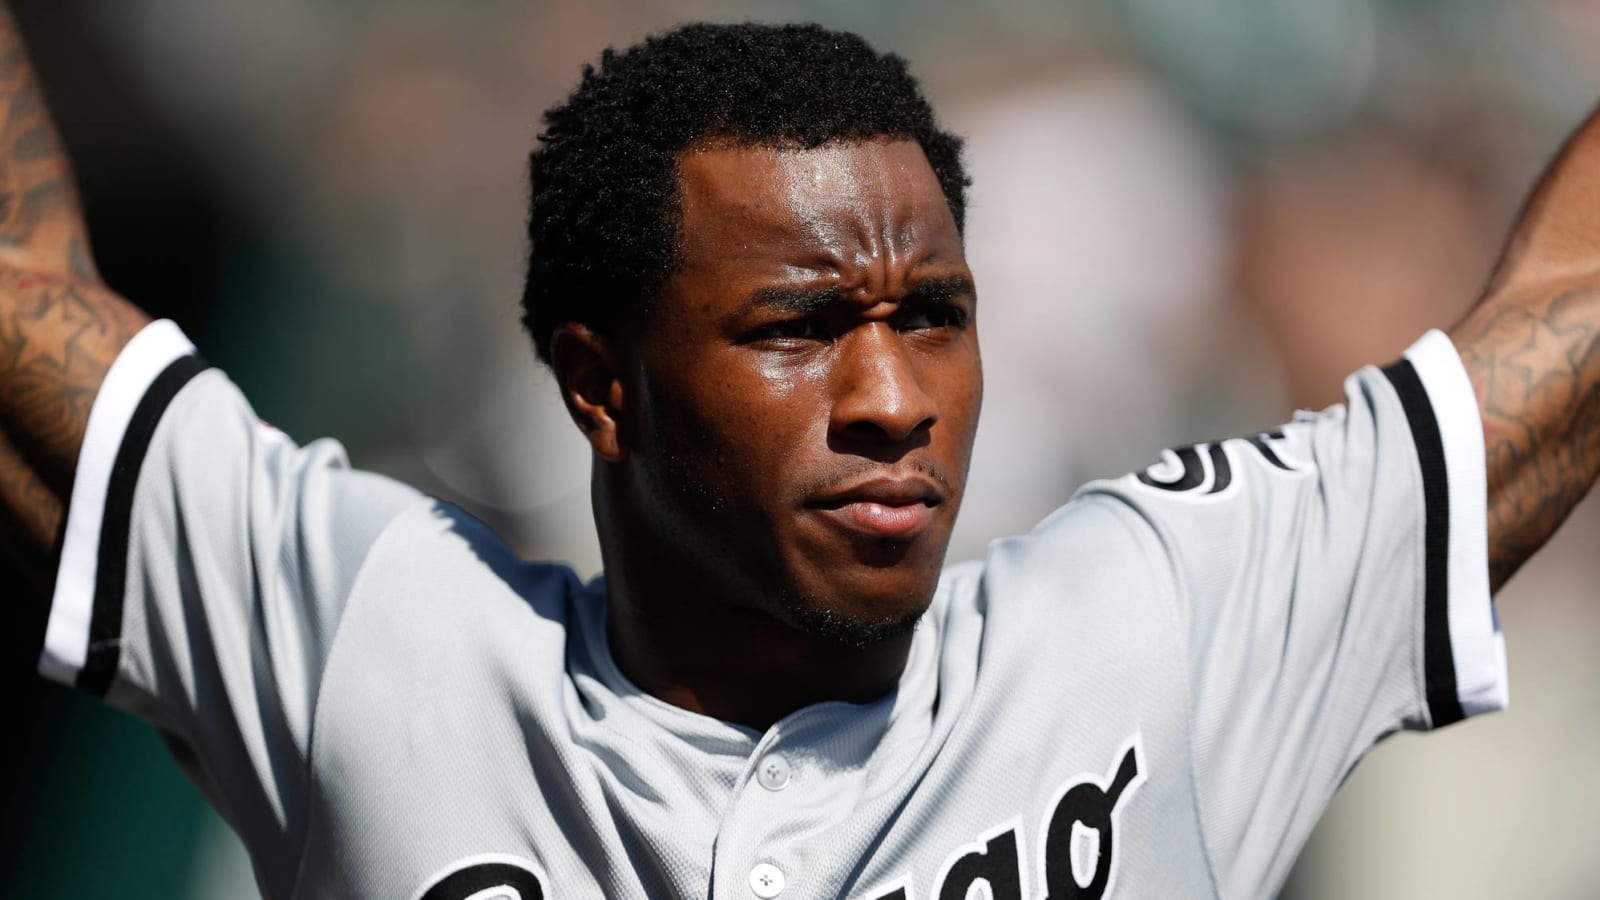 White Sox star Tim Anderson is now represented by Klutch Sports